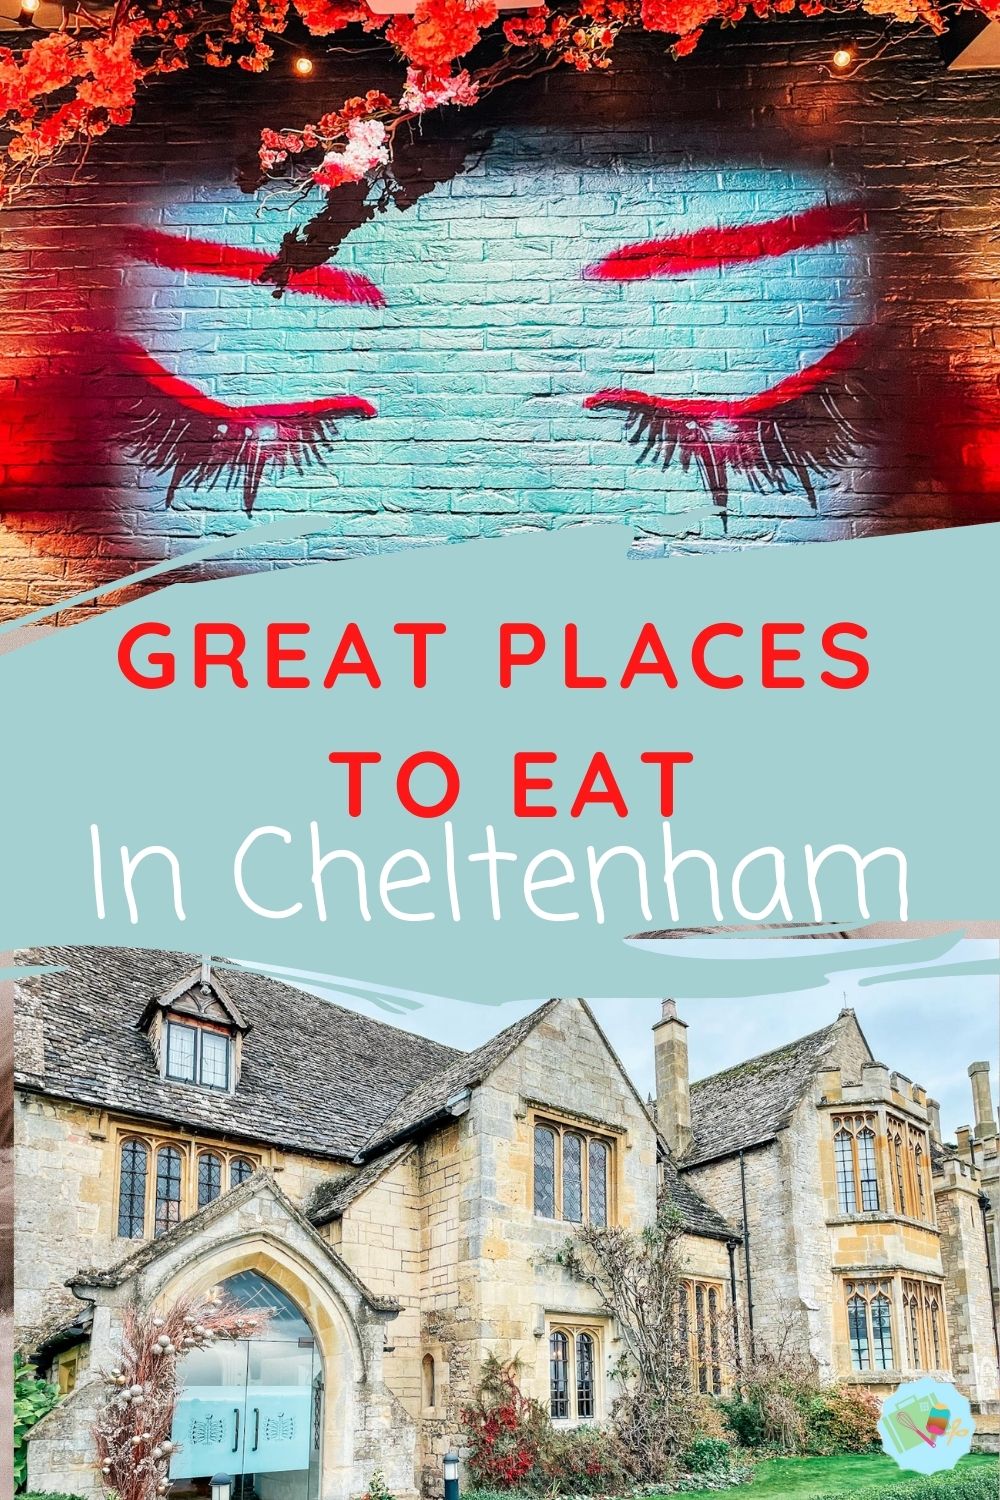 Great places to eat in Cheltenham, suggestions for great restaurants and snacks in Cheltenham